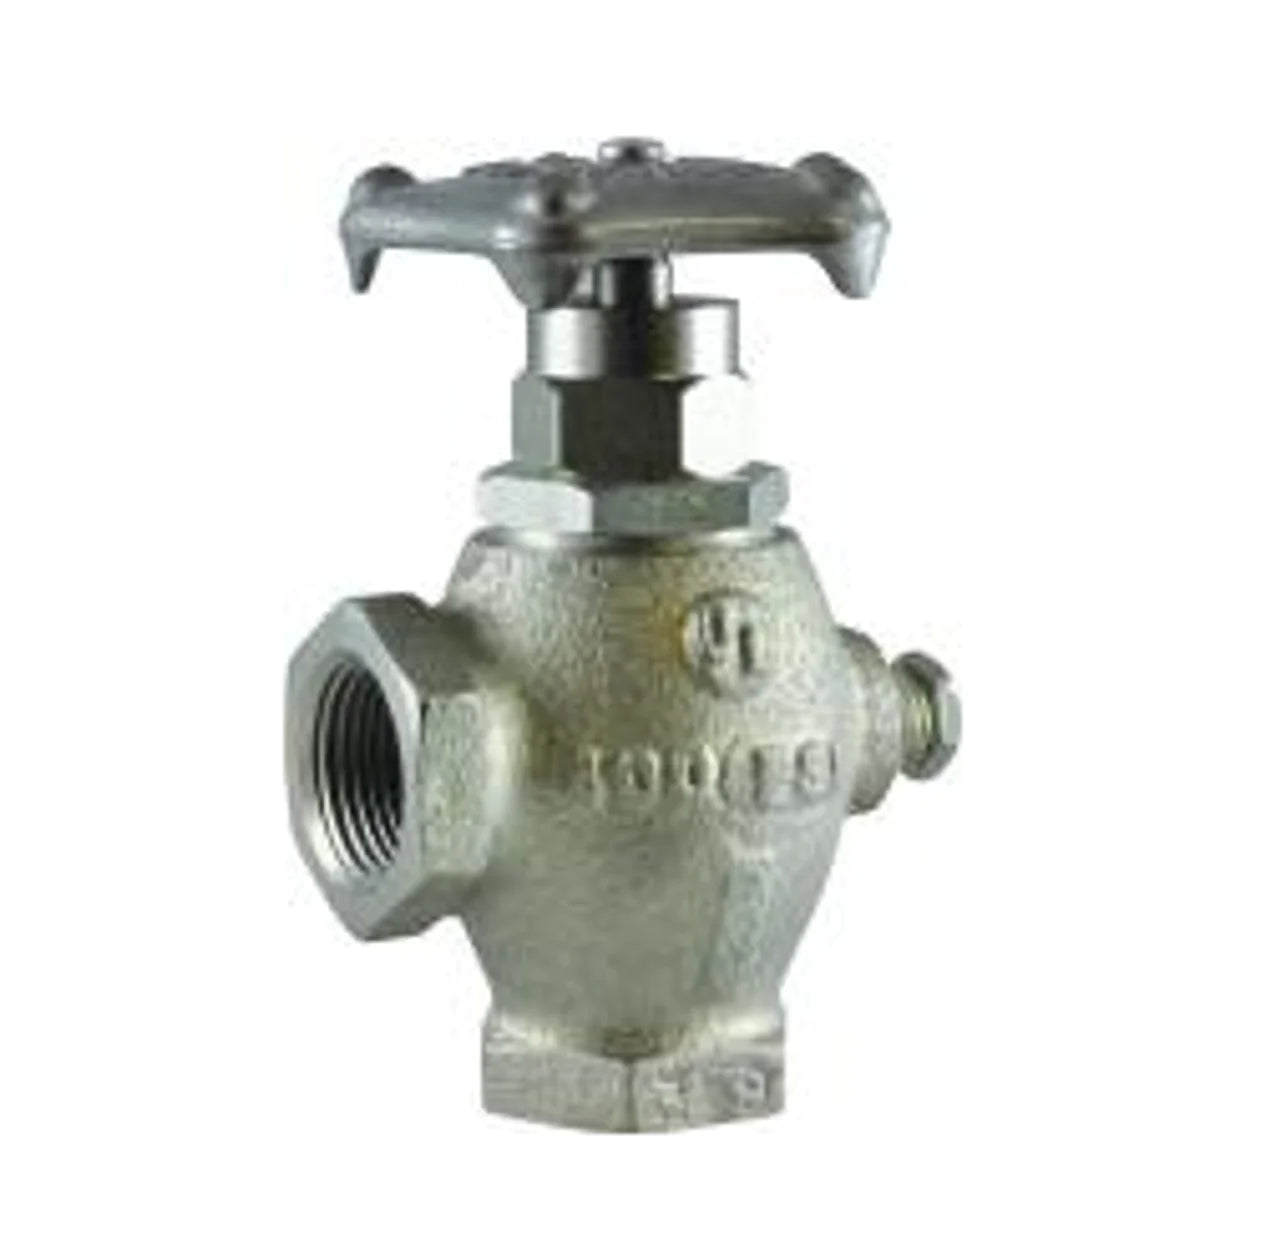 Metallic valve with a handwheel-style handle, rounded body, and threaded side connections, marked with specifications, used for controlling fluid flow in industrial or plumbing applications